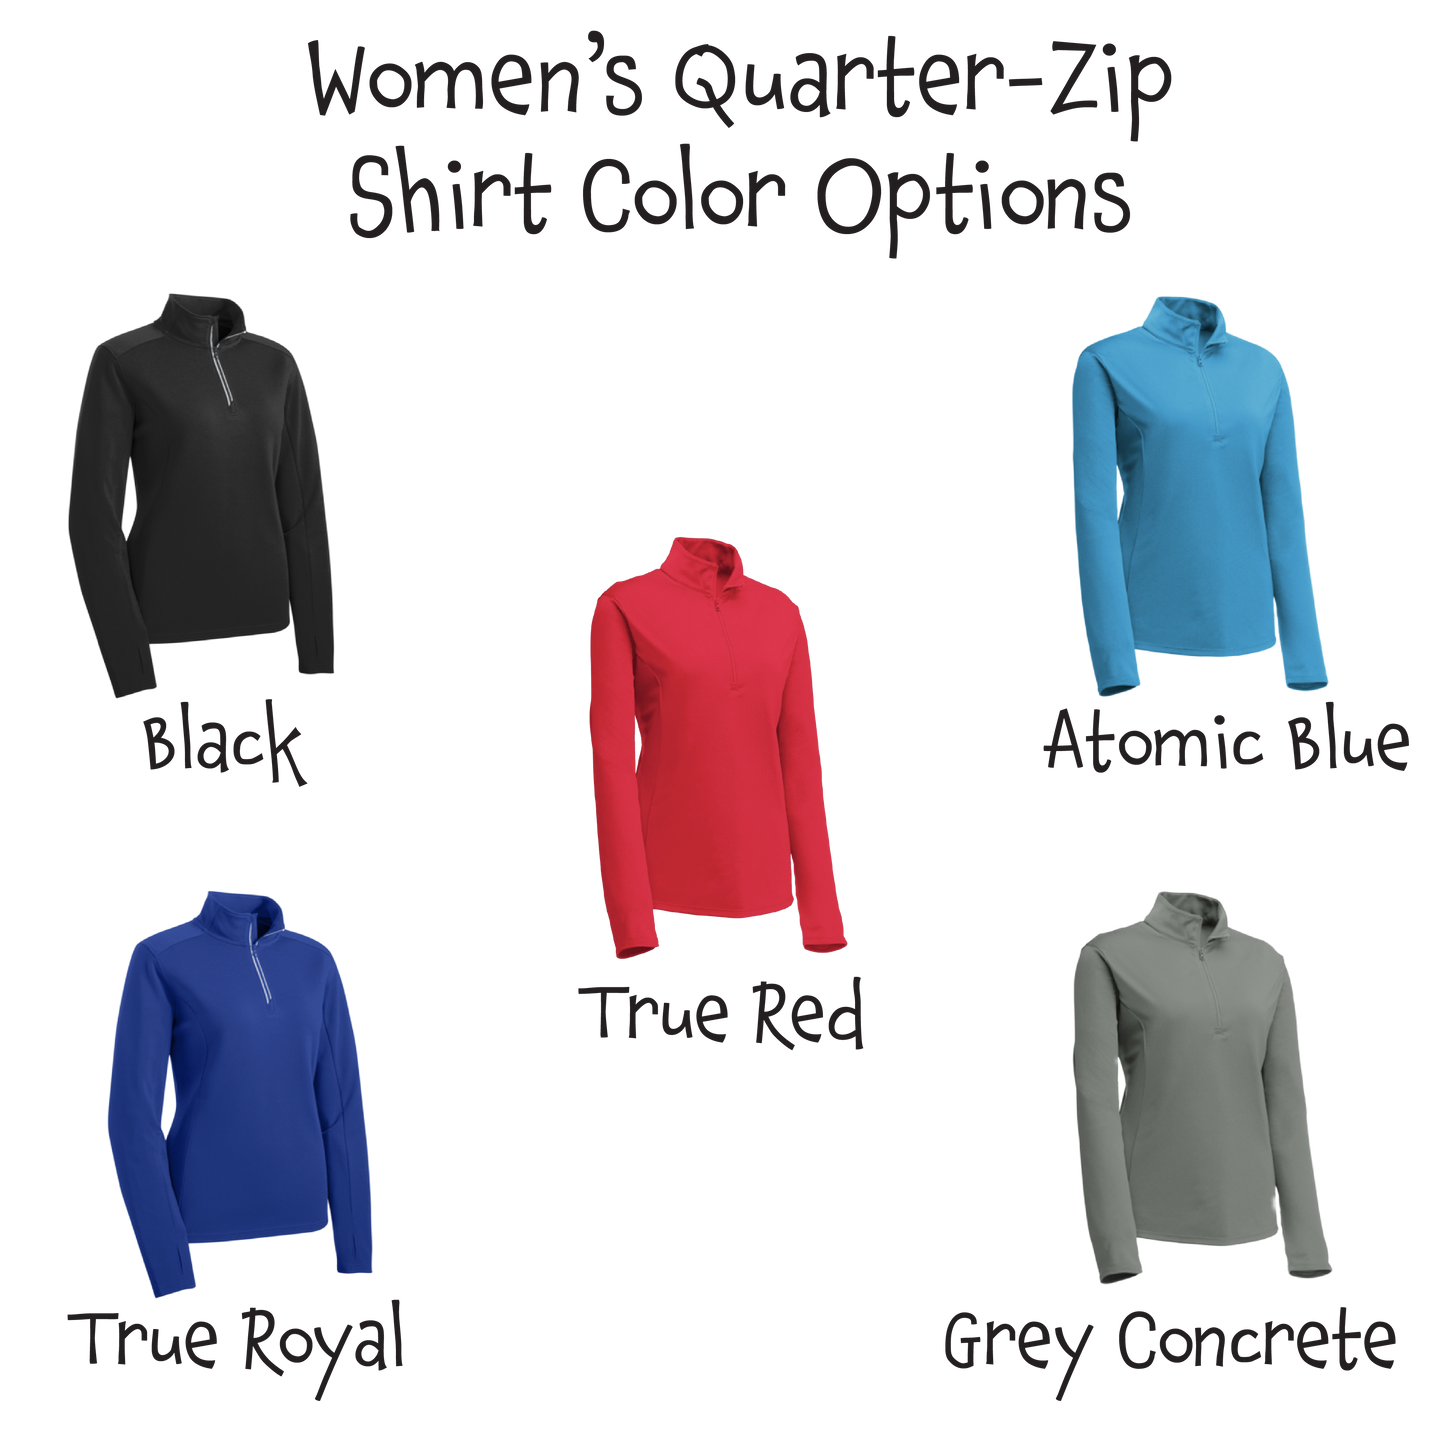 Dink Responsibly | Women's 1/4 Zip Pickleball Pullover | 100% Polyester